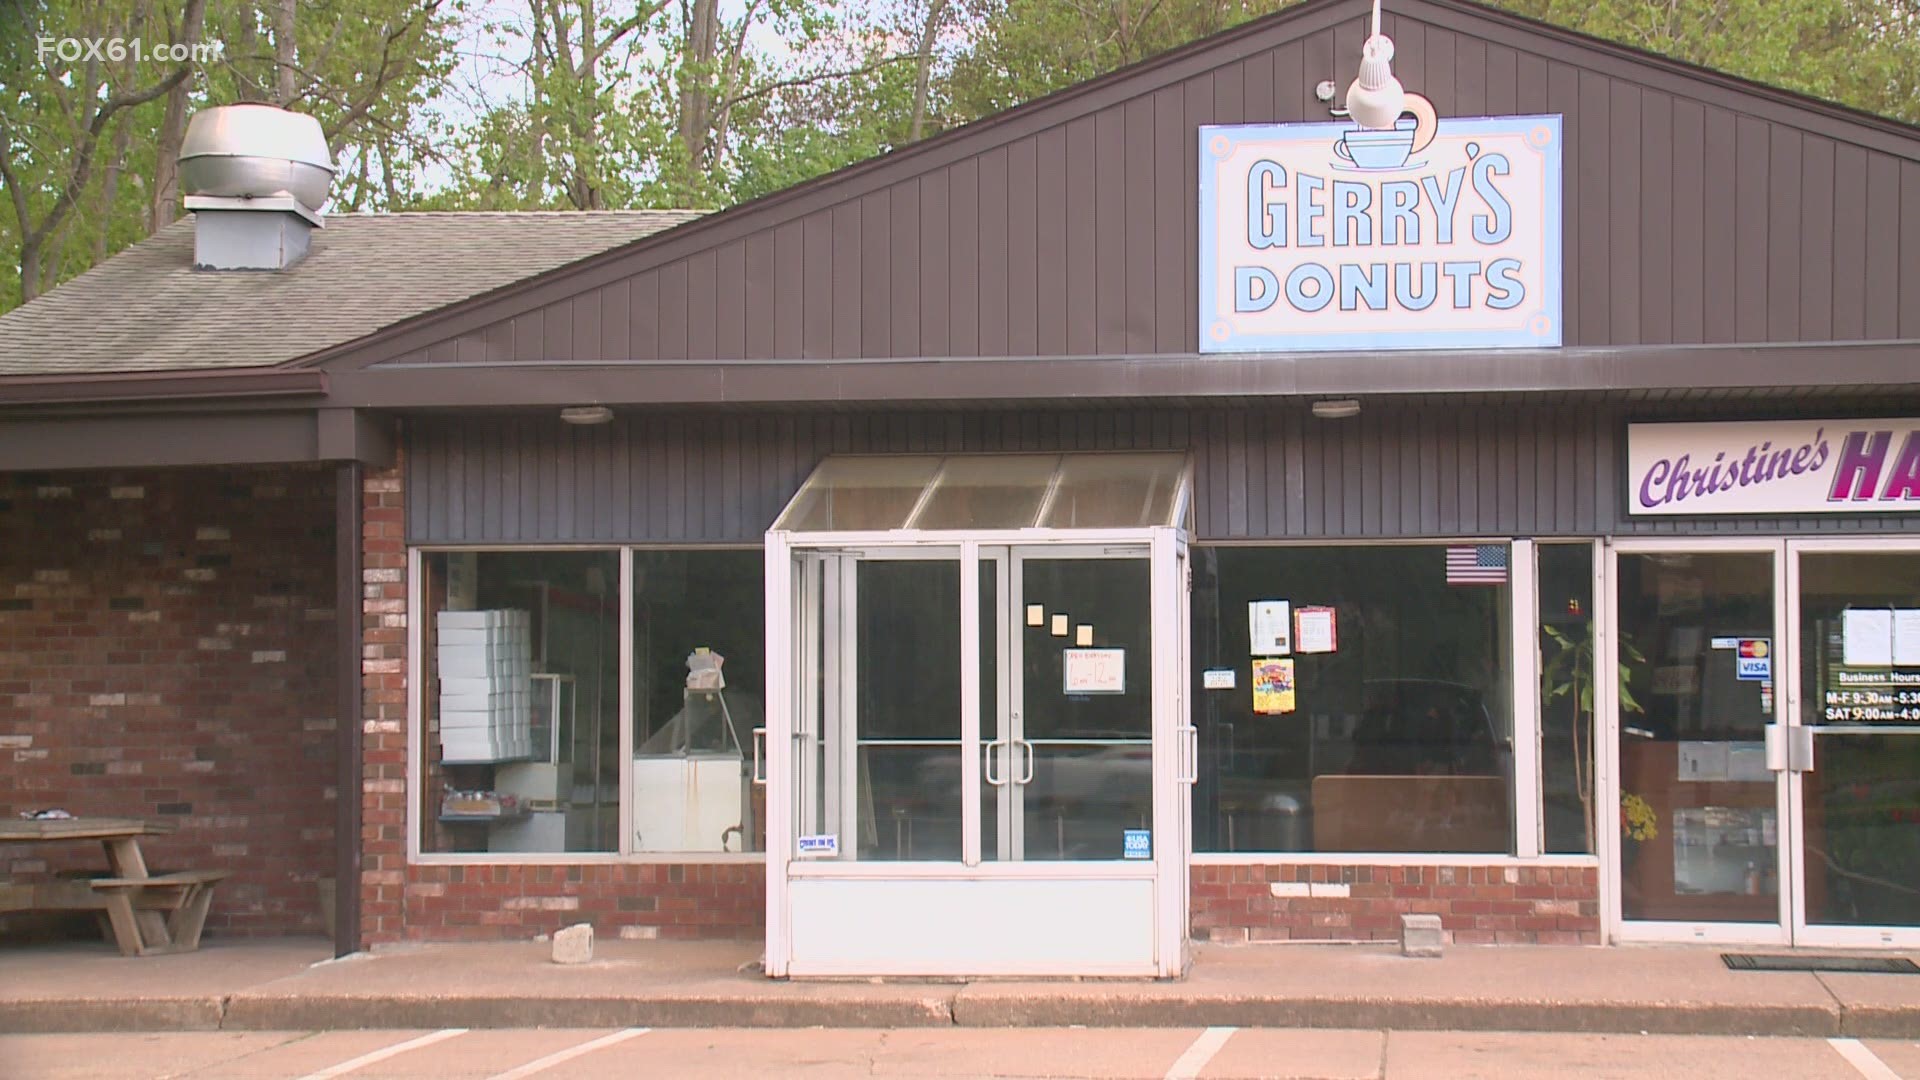 Health officials say they have received several reports of gastrointestinal illnesses from people who consumed the food from Gerry's Donuts.